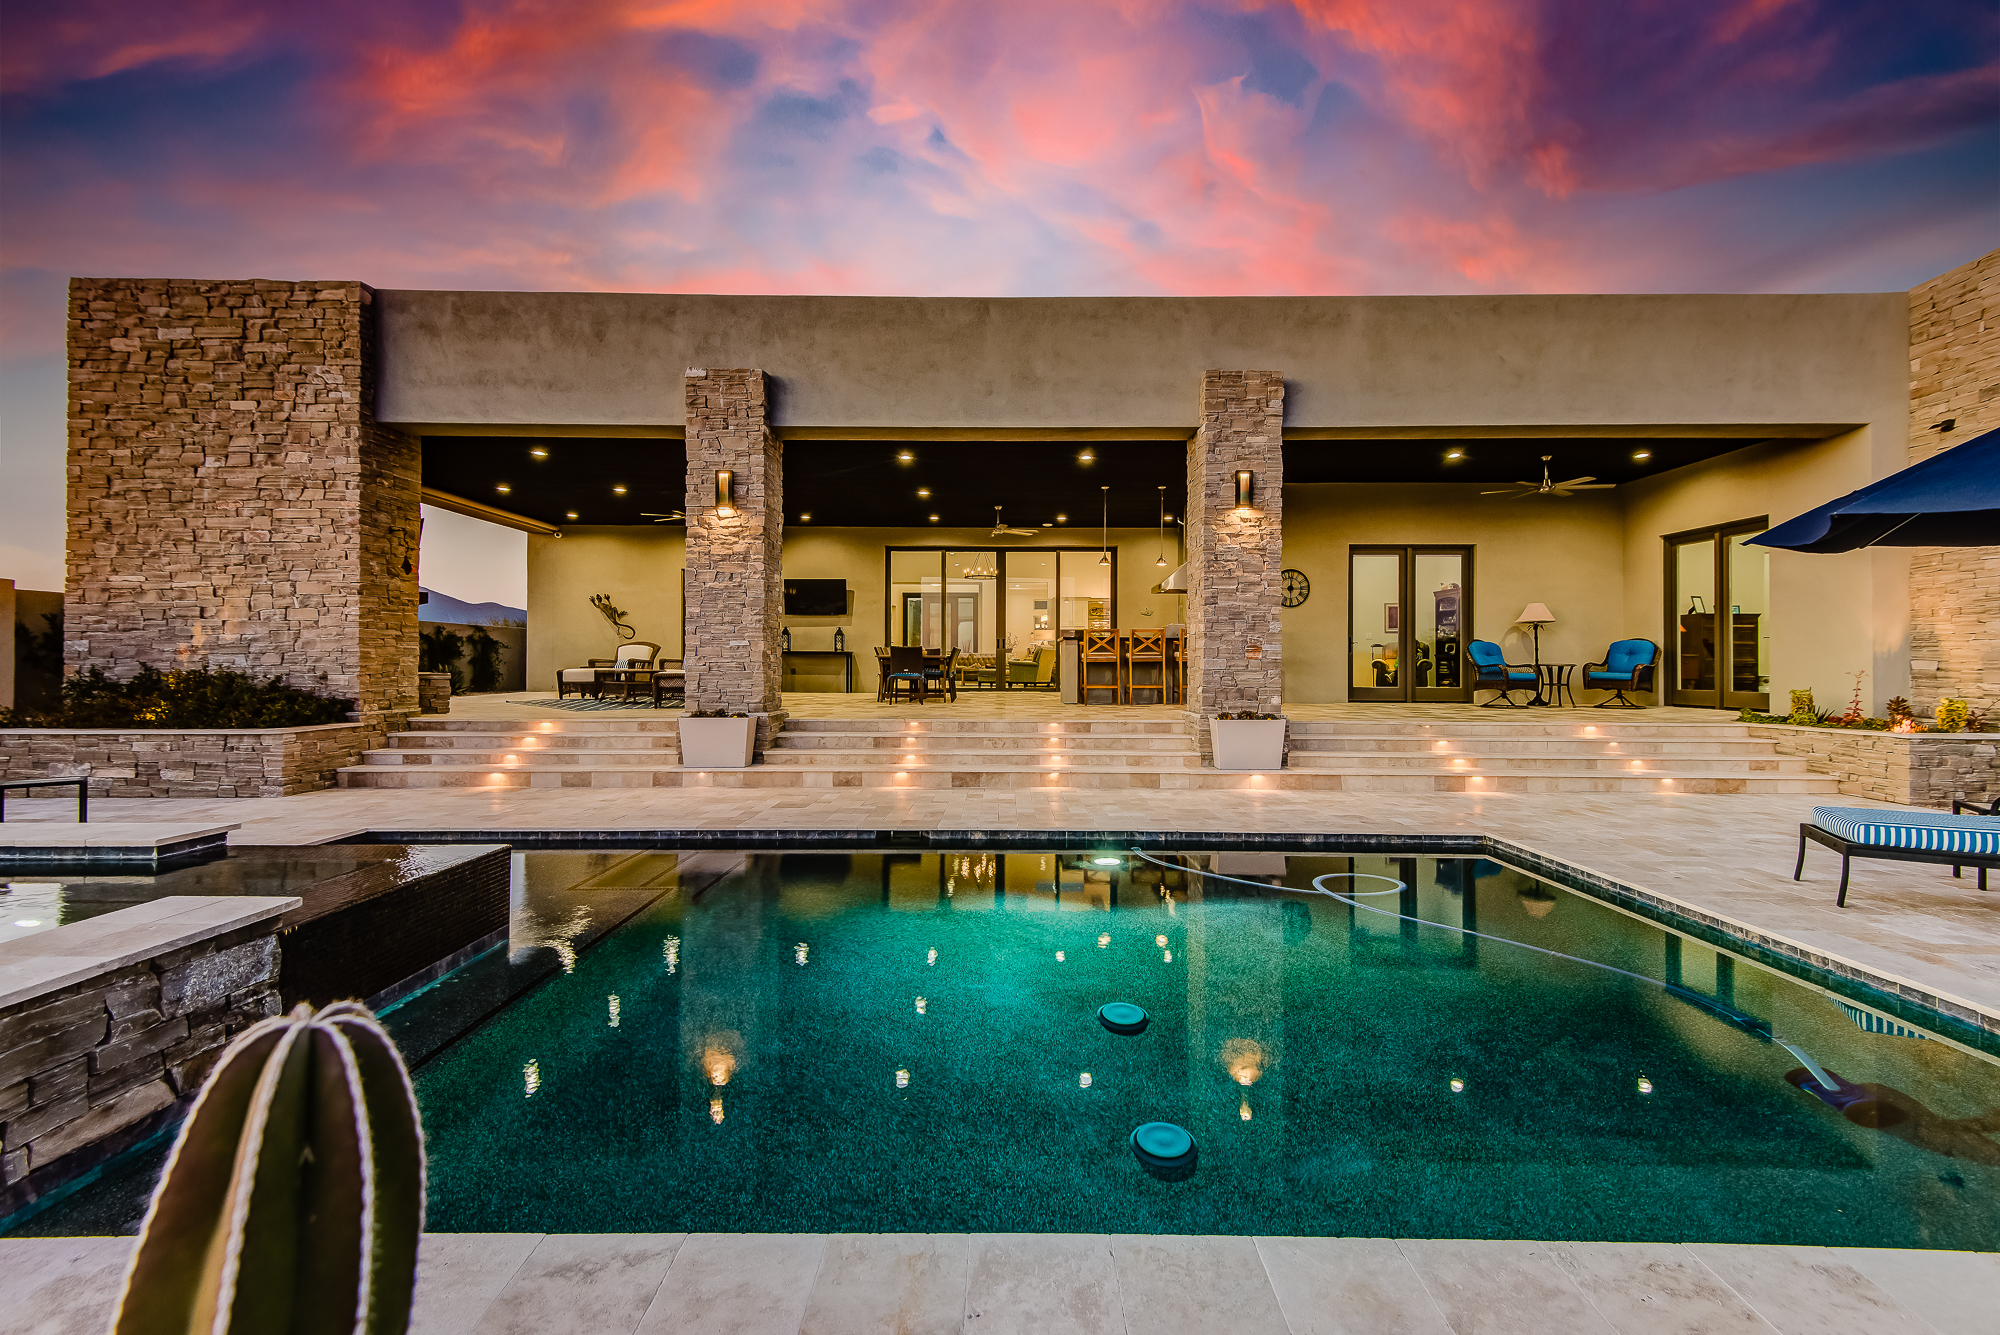 pool and patio at sunset photo